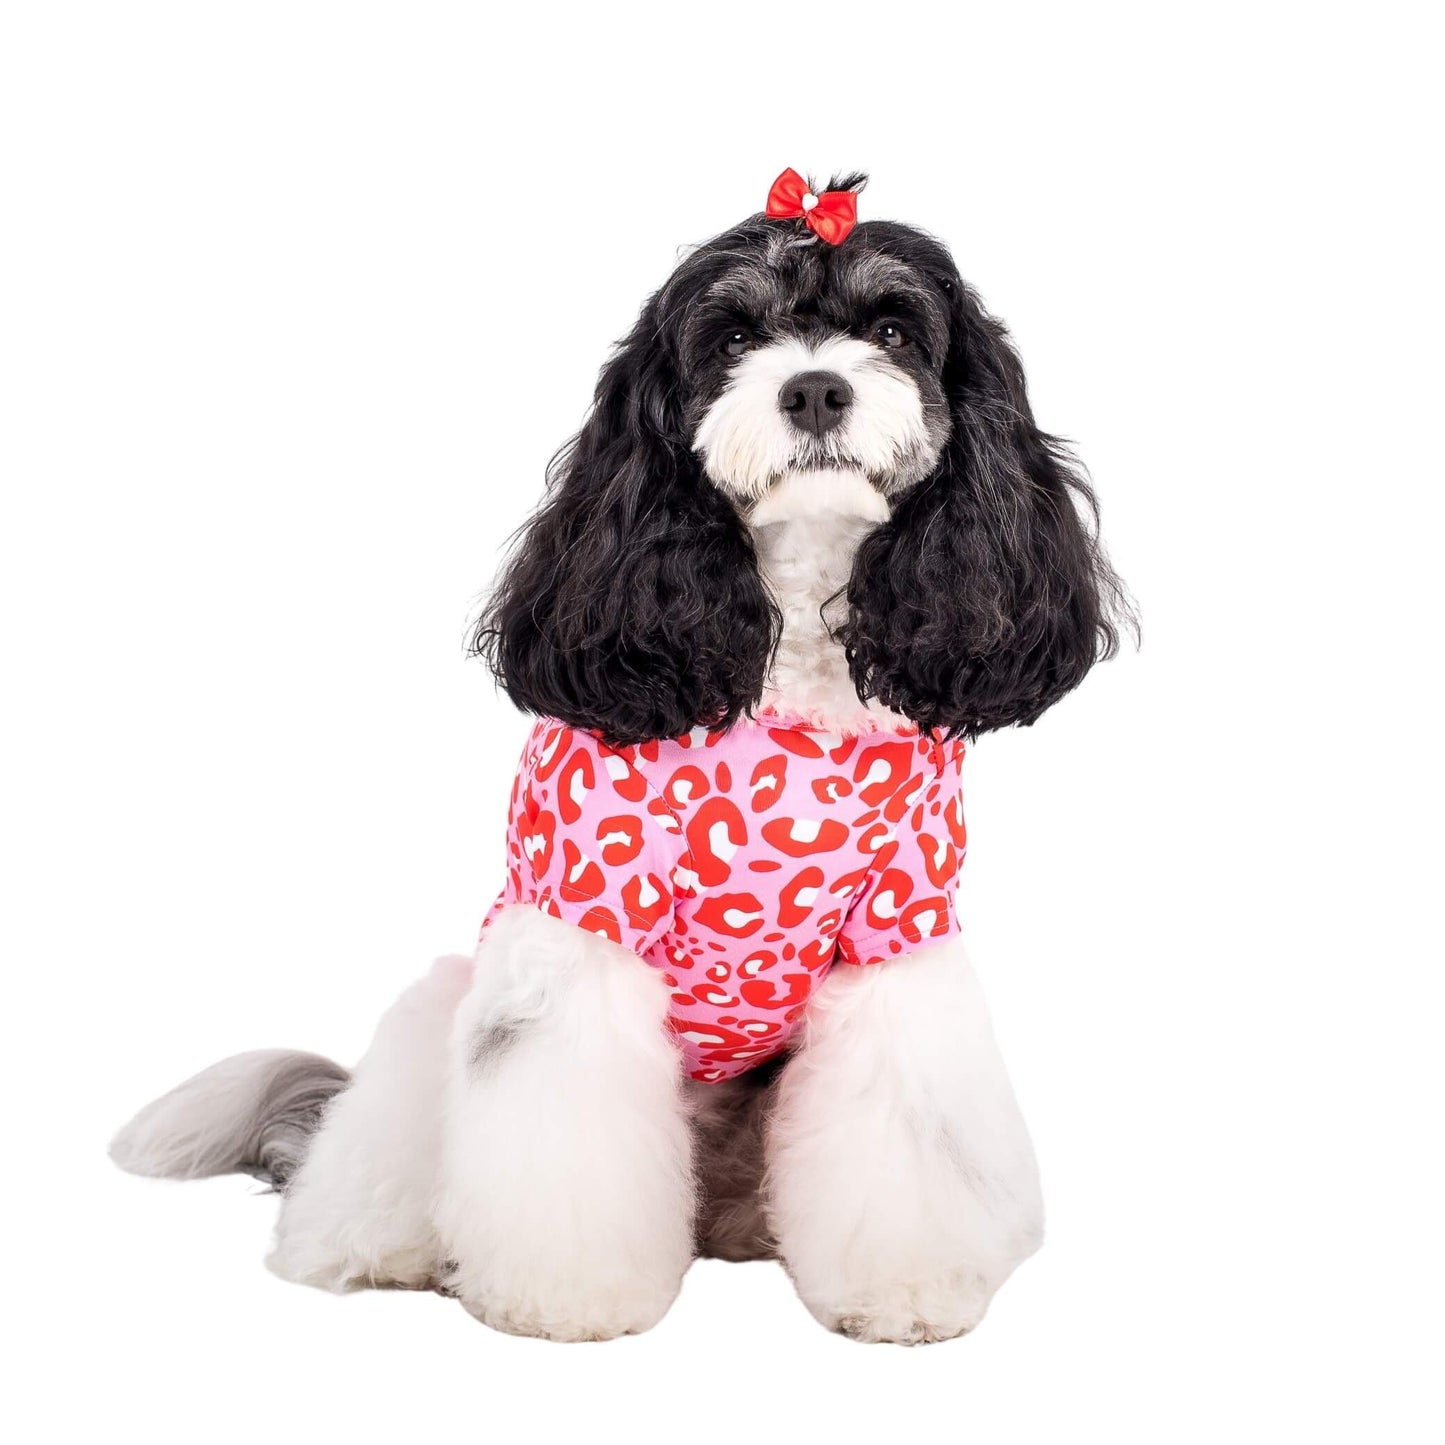 Rosie the Cavoodle wearing Vibrant Hounds Fierve in Pink dog shirt. The shirt is a red and pink leopard print.